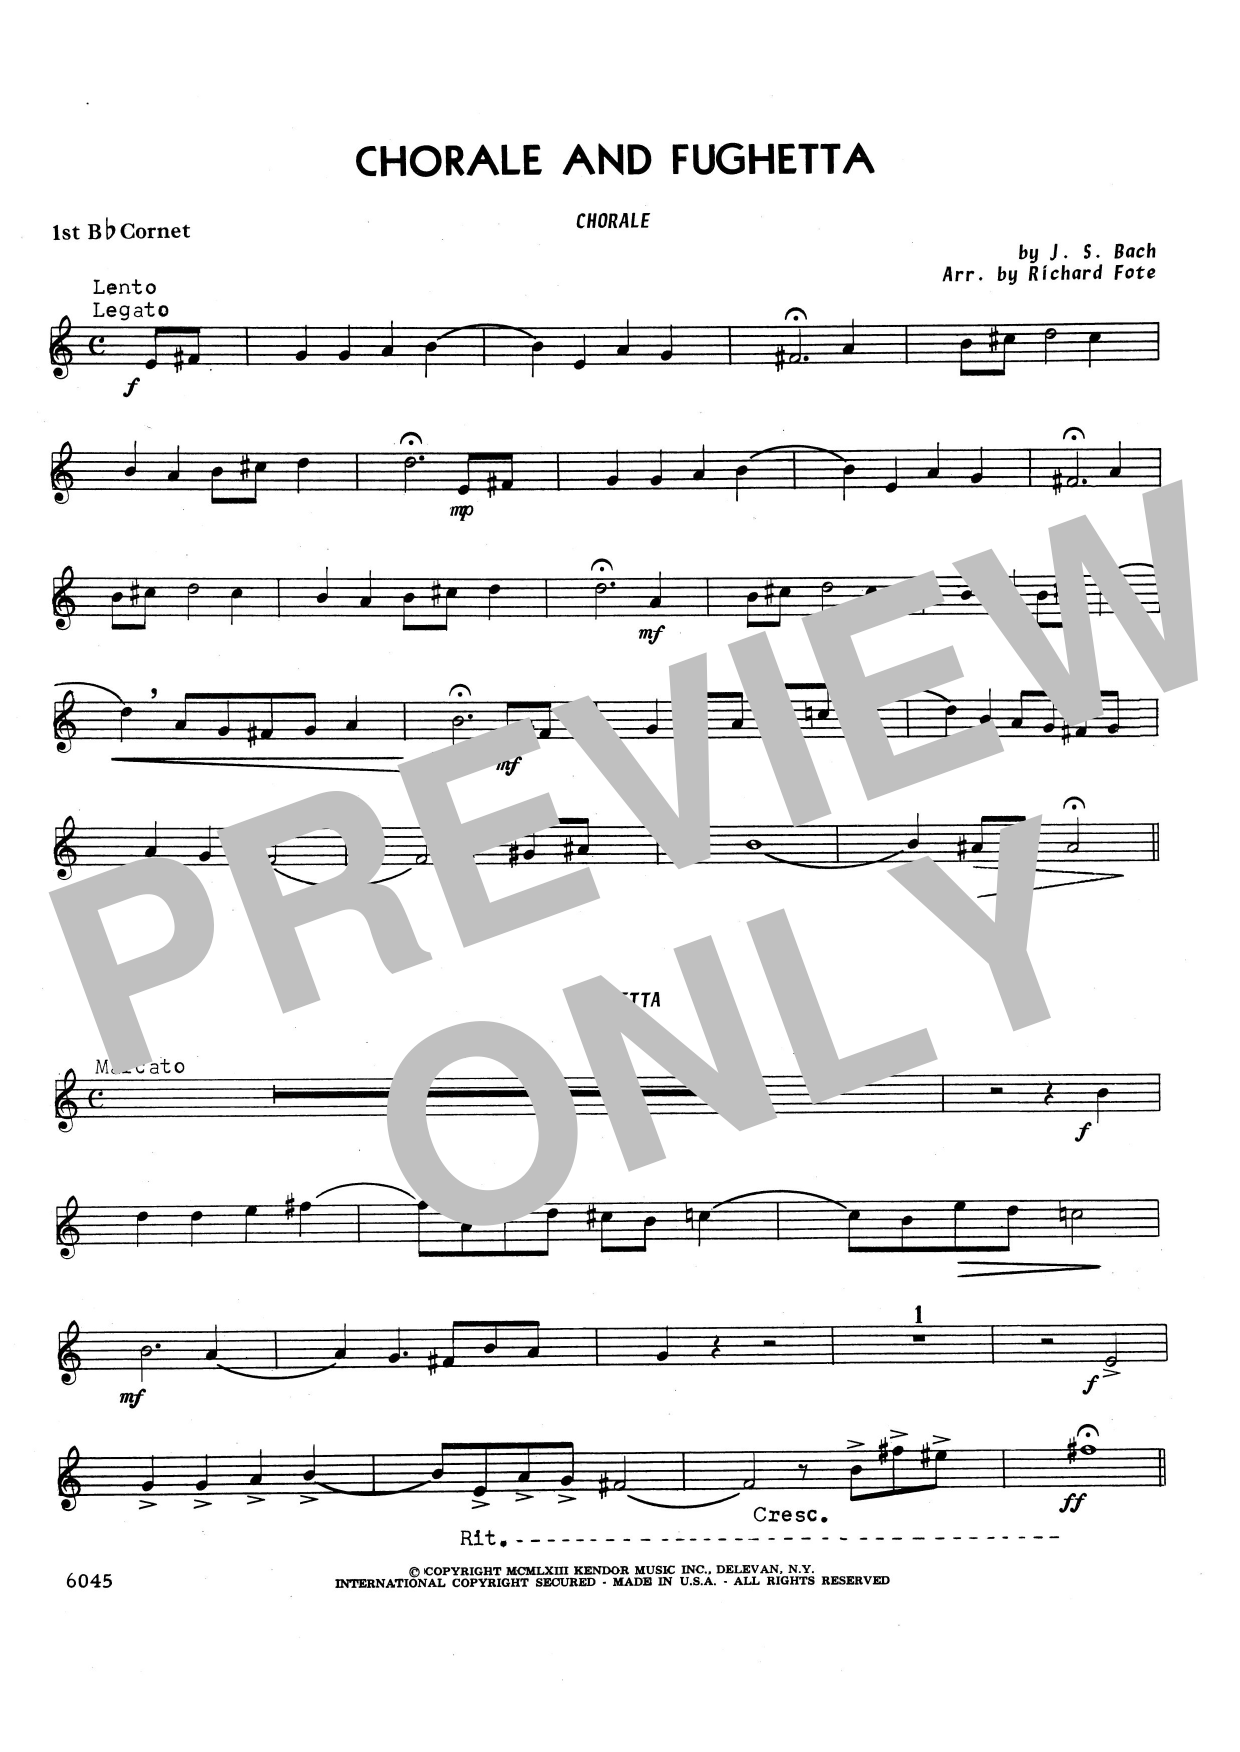 Download Richard Fote Chorale And Fughetta - 1st Bb Trumpet Sheet Music